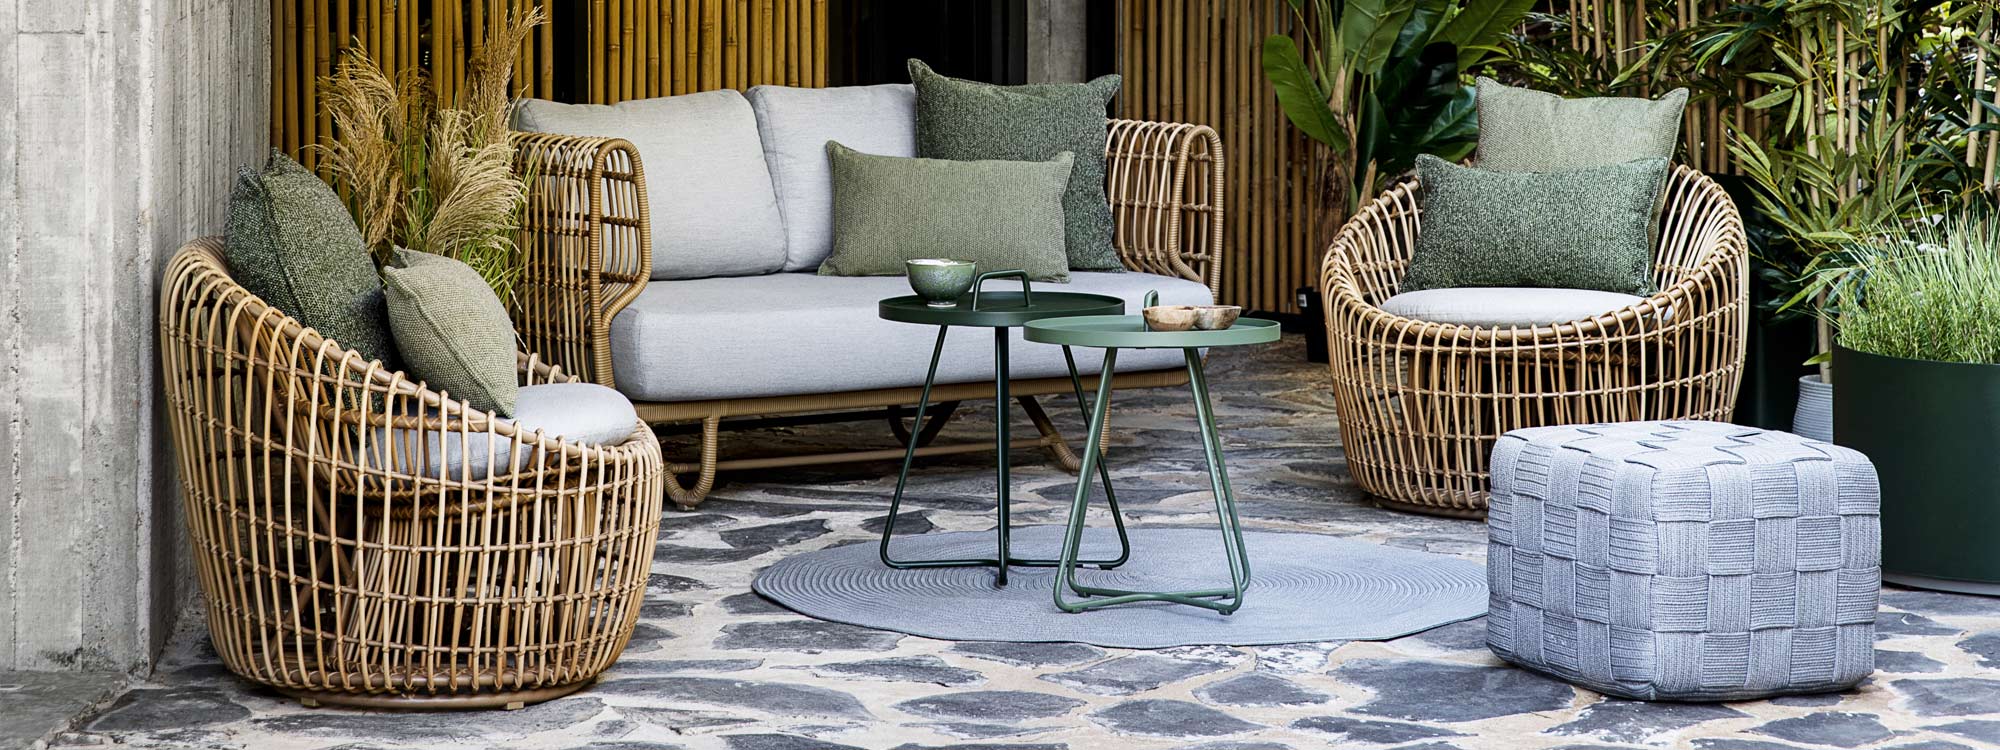 Image of Cane-line Nest sofa and lounge chairs in natural Cane-line weave with On The Move garden tray tables in the centre